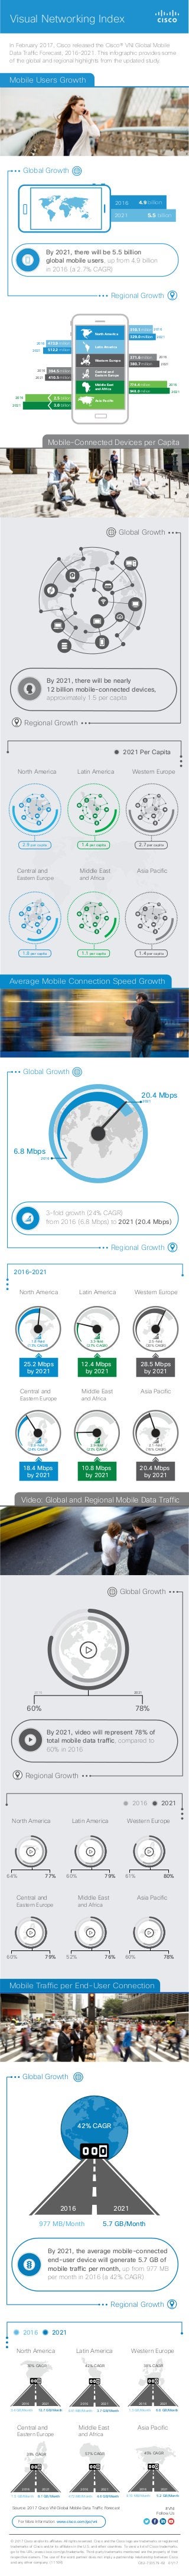 In February 2017, Cisco released the Cisco® VNI Global Mobile
Data Traffic Forecast, 2016–2021. This infographic provides some
of the global and regional highlights from the updated study.
Visual Networking Index
2021 Per Capita
Regional Growth
Global Growth
North America Latin America Western Europe
Central and
Eastern Europe
Middle East Asia Pacific
and Africa
2.9 per capita 1.4 per capita 2.7 per capita
1.8 per capita 1.1 per capita 1.4 per capita
By 2021, there will be nearly
12 billion mobile-connected devices,
approximately 1.5 per capita
By 2021, video will represent 78% of
total mobile data traffic, compared to
60% in 2016
North America Latin America Western Europe
Regional Growth
Global Growth
20212016
60% 78%
2016 2021
3-fold growth (24% CAGR)
from 2016 (6.8 Mbps) to 2021 (20.4 Mbps)
2016–2021
Regional Growth
Global Growth
25.2 Mbps
by 2021
North America Latin America Western Europe
Central and
Eastern Europe
Middle East Asia Pacific
and Africa
12.4 Mbps
by 2021
28.5 Mbps
by 2021
18.4 Mbps
by 2021
10.8 Mbps
by 2021
20.4 Mbps
by 2021
1.8-fold
(13% CAGR)
3.3-fold
(27% CAGR)
2.5-fold
(20% CAGR)
2.9-fold
(24% CAGR)
2.9-fold
(23% CAGR)
2.1-fold
(16% CAGR)
20.4 Mbps
2021
6.8 Mbps
2016
By 2021, the average mobile-connected
end-user device will generate 5.7 GB of
mobile traffic per month, up from 977 MB
per month in 2016 (a 42% CAGR)
20212016
Regional Growth
For More Information: www.cisco.com/go/vni
#VNI
Follow Us
Source: 2017 Cisco VNI Global Mobile Data Traffic Forecast
Mobile Users Growth
Average Mobile Connection Speed Growth
Mobile Traffic per End-User Connection
Regional Growth
Global Growth
329.0 million
310.1 million
380.7 million
371.6 million
948.0 million
774.4 million
2016
2021
512.2 million
473.9 million2016
2021
2016
2021
410.5 million
394.5 million2016
2021
2016
2021
2016
2021 3.0 billion
2.5 billion
North America
Latin America
Western Europe
Central and
Eastern Europe
Middle East
and Africa
Asia Pacific
4.9 billion2016
2021 5.5 billion
By 2021, there will be 5.5 billion
global mobile users, up from 4.9 billion
in 2016 (a 2.7% CAGR)
Mobile-Connected Devices per Capita
Video: Global and Regional Mobile Data Traffic
64% 77% 60% 79% 61% 80%
60% 79% 52% 76% 60% 78%
Central and
Eastern Europe
Middle East Asia Pacific
and Africa
© 2017 Cisco and/or its affiliates. All rights reserved. Cisco and the Cisco logo are trademarks or registered
trademarks of Cisco and/or its affiliates in the U.S. and other countries. To view a list of Cisco trademarks,
go to this URL: www.cisco.com/go/trademarks. Third-party trademarks mentioned are the property of their
respective owners. The use of the word partner does not imply a partnership relationship between Cisco
and any other company. (1110R) C82-733579-02 01/17
Global Growth
North America Latin America Western Europe
Central and
Eastern Europe
Middle East Asia Pacific
and Africa
30% CAGR
3.4 GB/Month 12.7 GB/Month
2016 2021
42% CAGR
641 MB/Month 3.7 GB/Month
2016 2021
38% CAGR
1.3 GB/Month 6.6 GB/Month
2016 2021
39% CAGR
1.5 GB/Month 8.1 GB/Month
2016 2021
57% CAGR
472 MB/Month 4.6 GB/Month
2016 2021
45% CAGR
810 MB/Month 5.2 GB/Month
2016 2021
42% CAGR
977 MB/Month 5.7 GB/Month
2016 2021
 